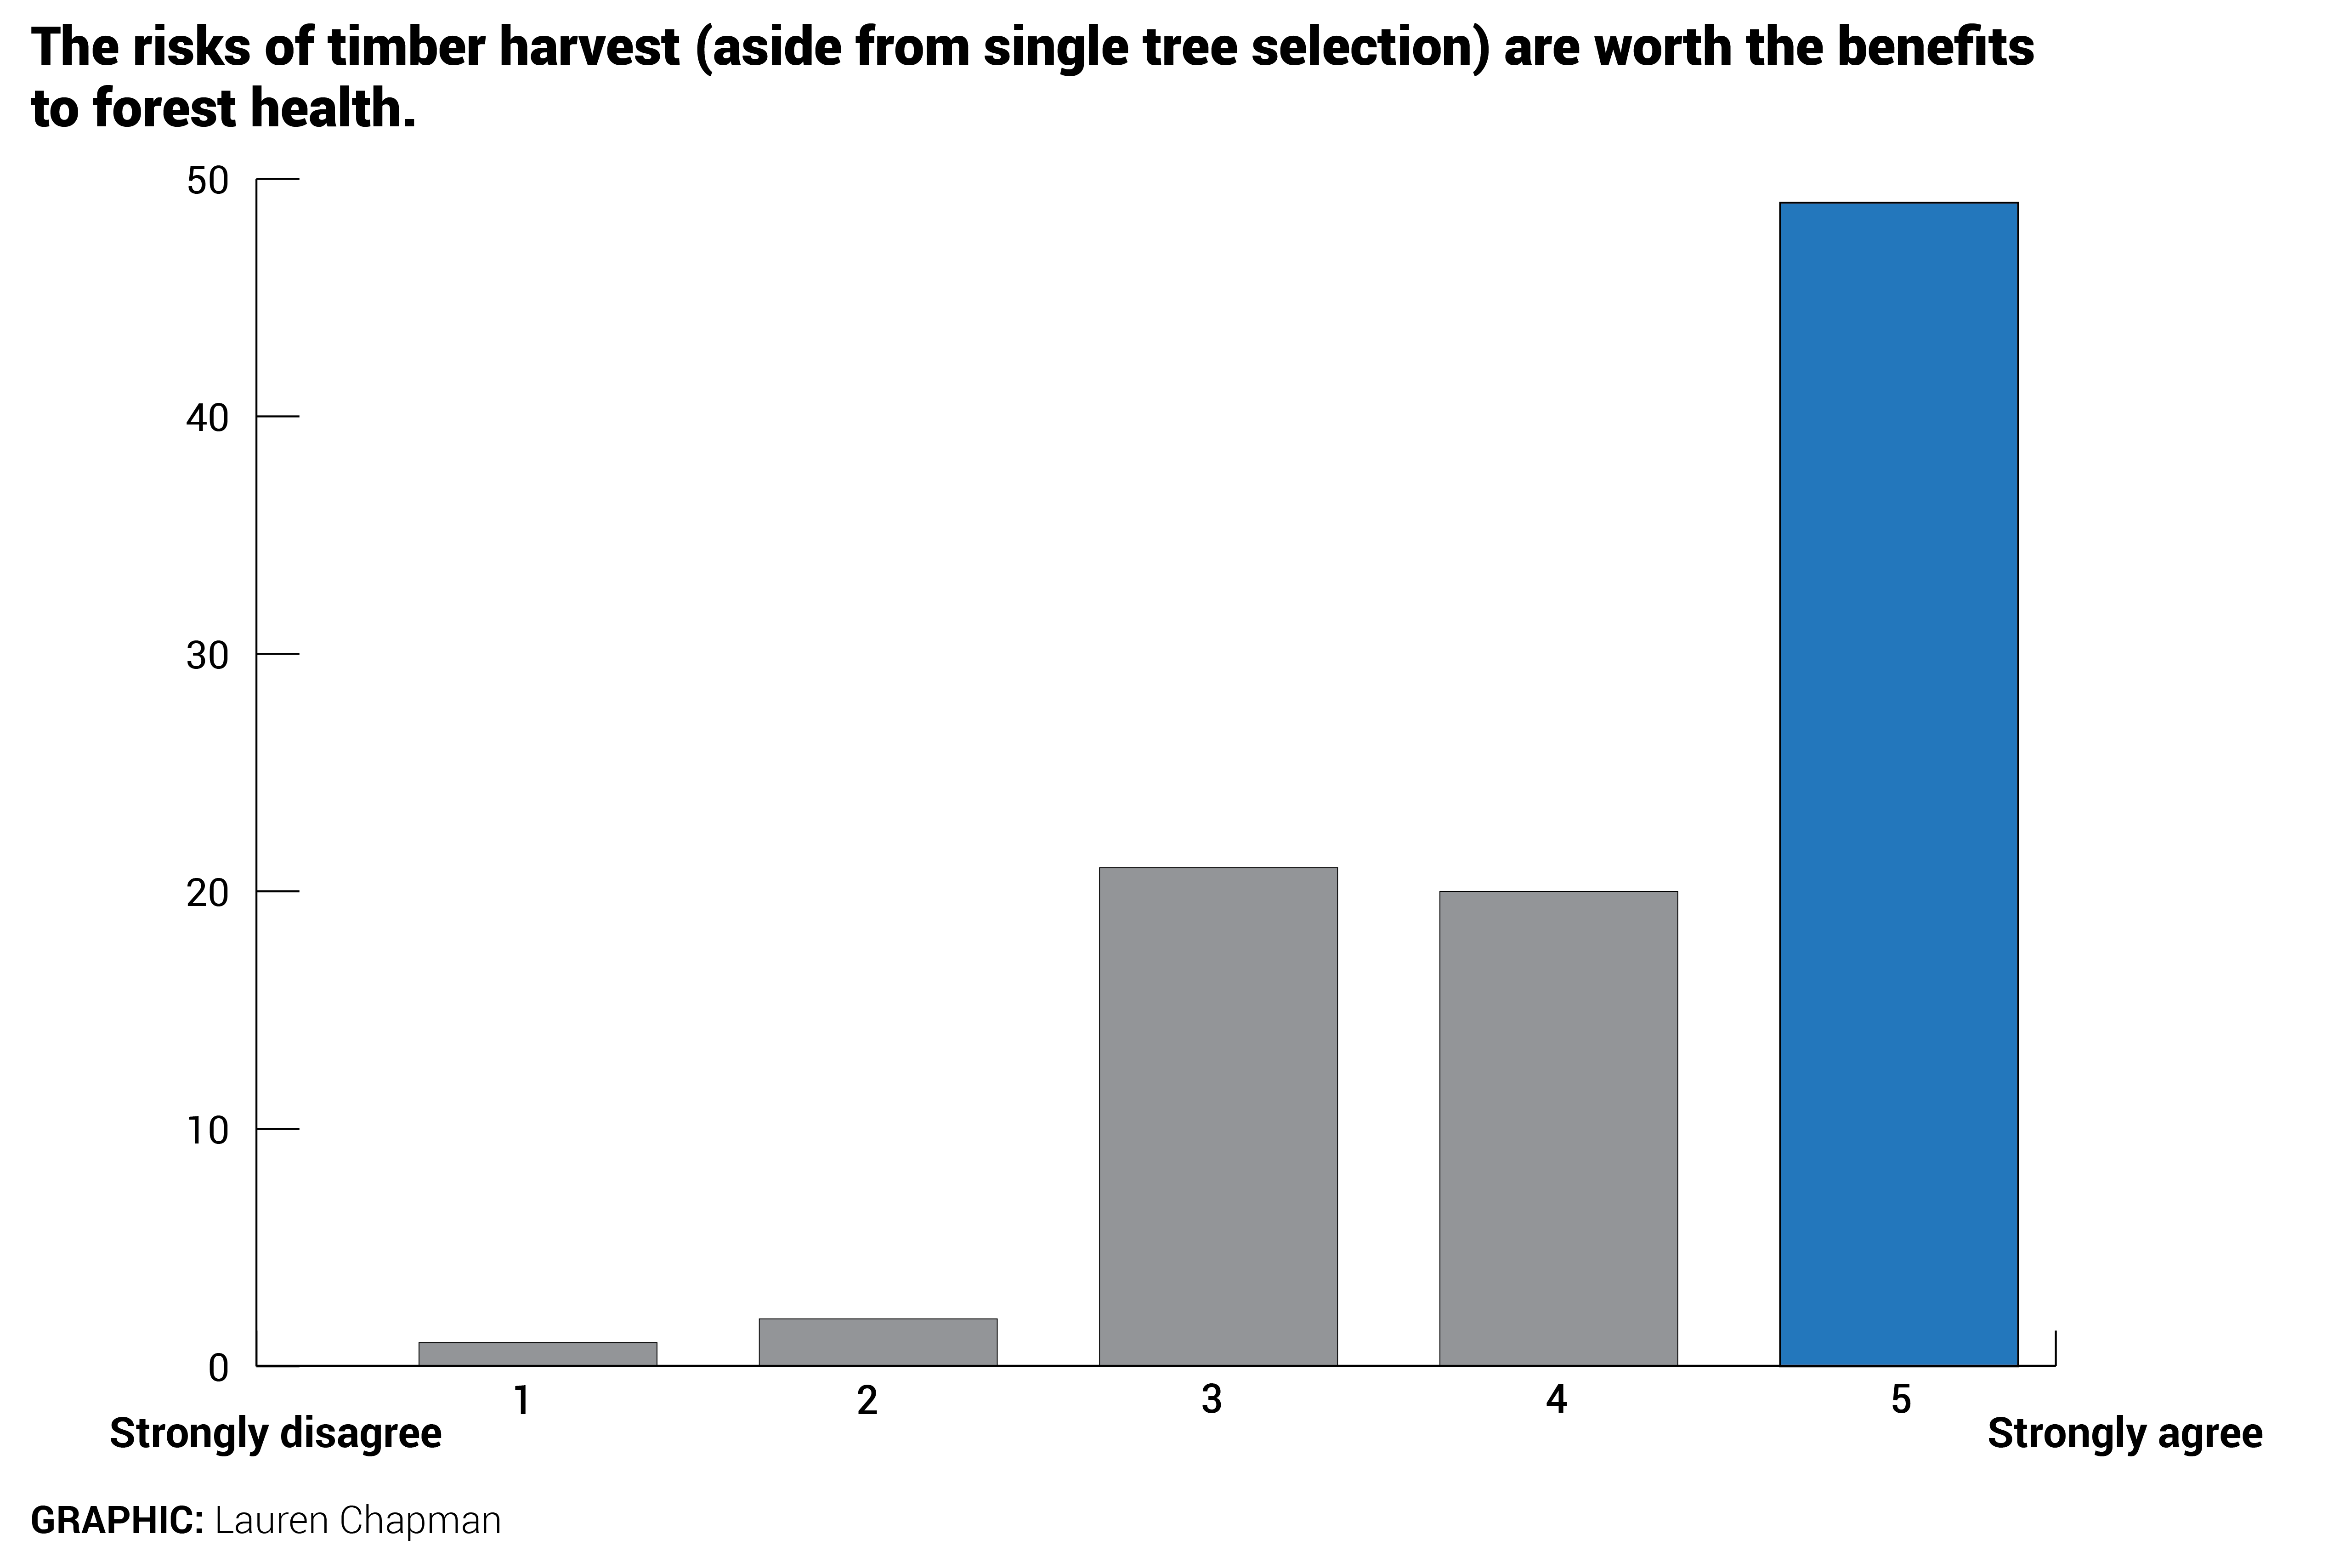 The risks of timber harvest (aside from single tree selection) are worth the benefits to forest health.
    On a scale of 1 to 5, where 1 is strongly disagree and 5 is strongly agree, 1 respondent said 1. 2 said 2. 21 said 3. 20 said 4. And 49 said 5.